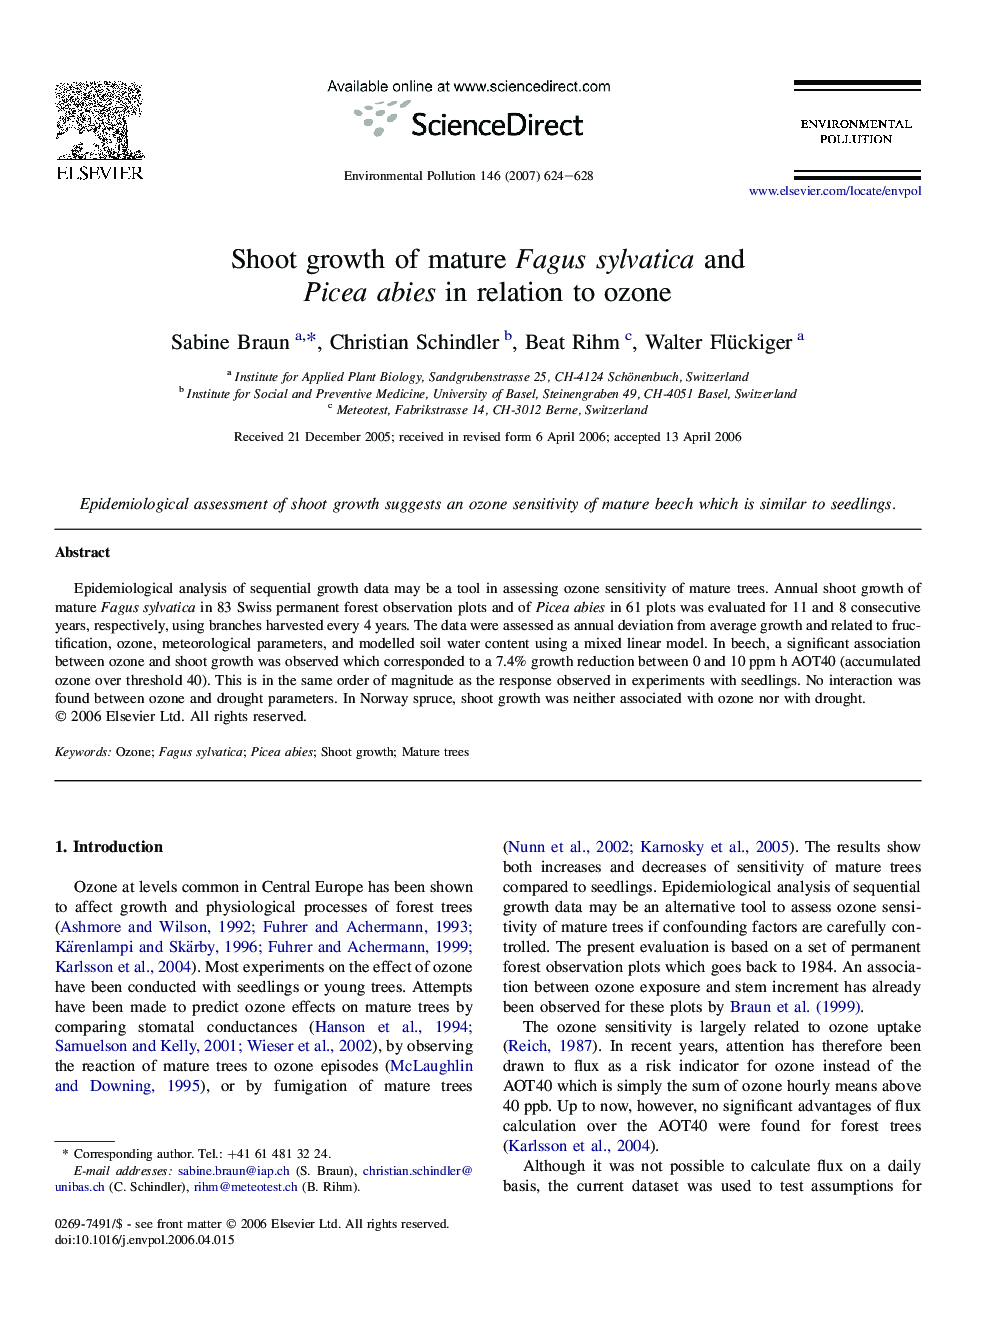 Shoot growth of mature Fagus sylvatica and Picea abies in relation to ozone